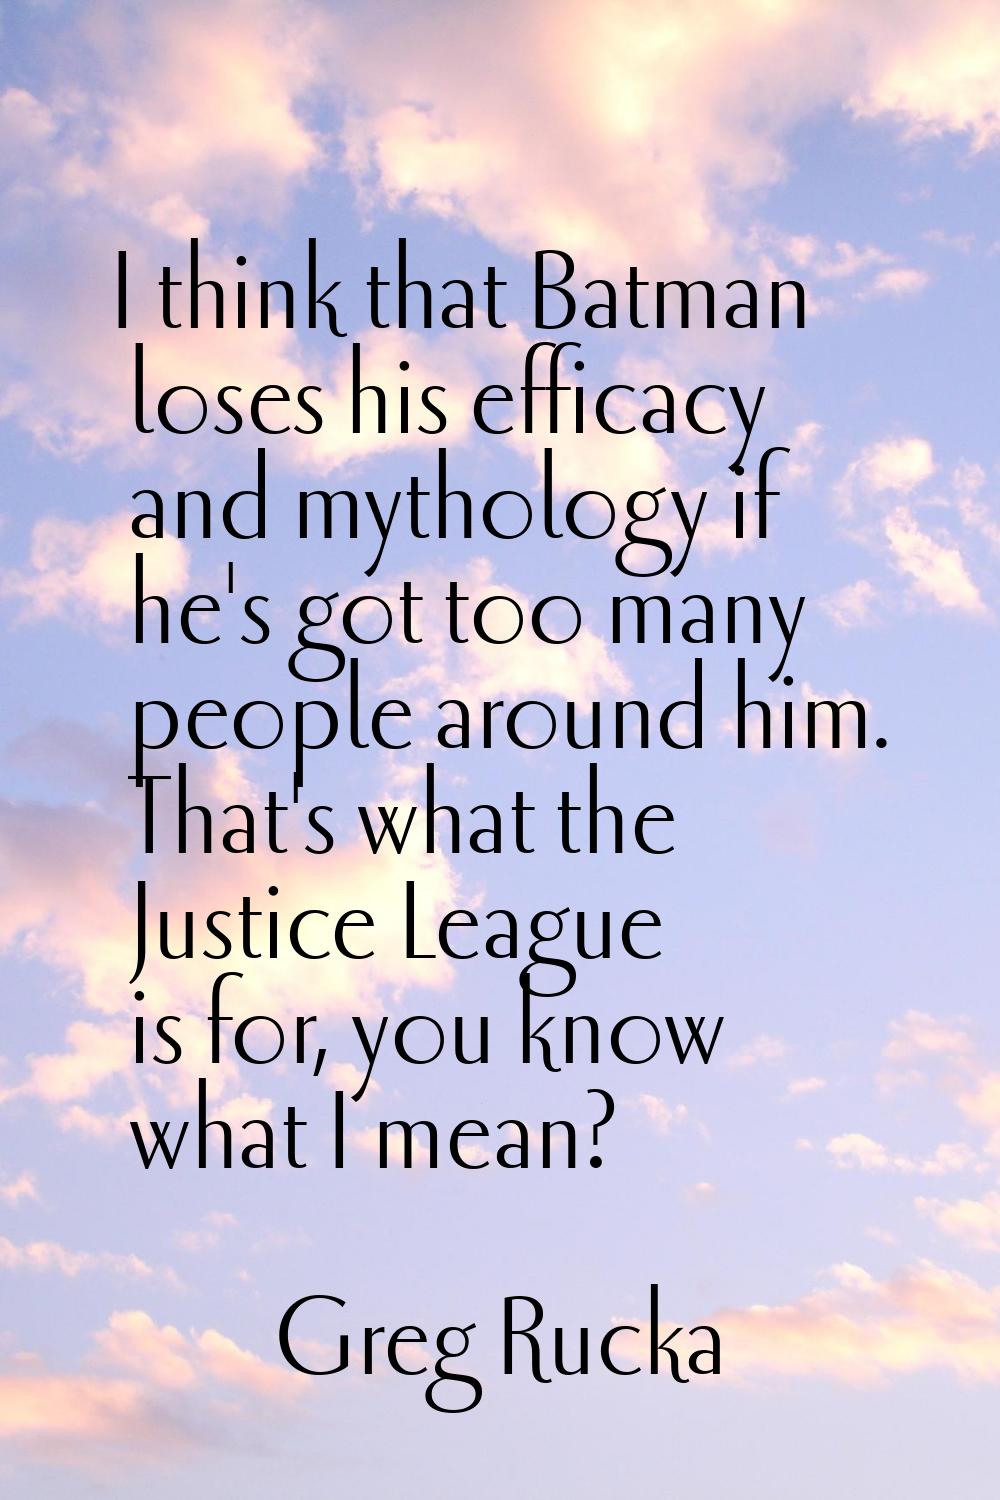 I think that Batman loses his efficacy and mythology if he's got too many people around him. That's